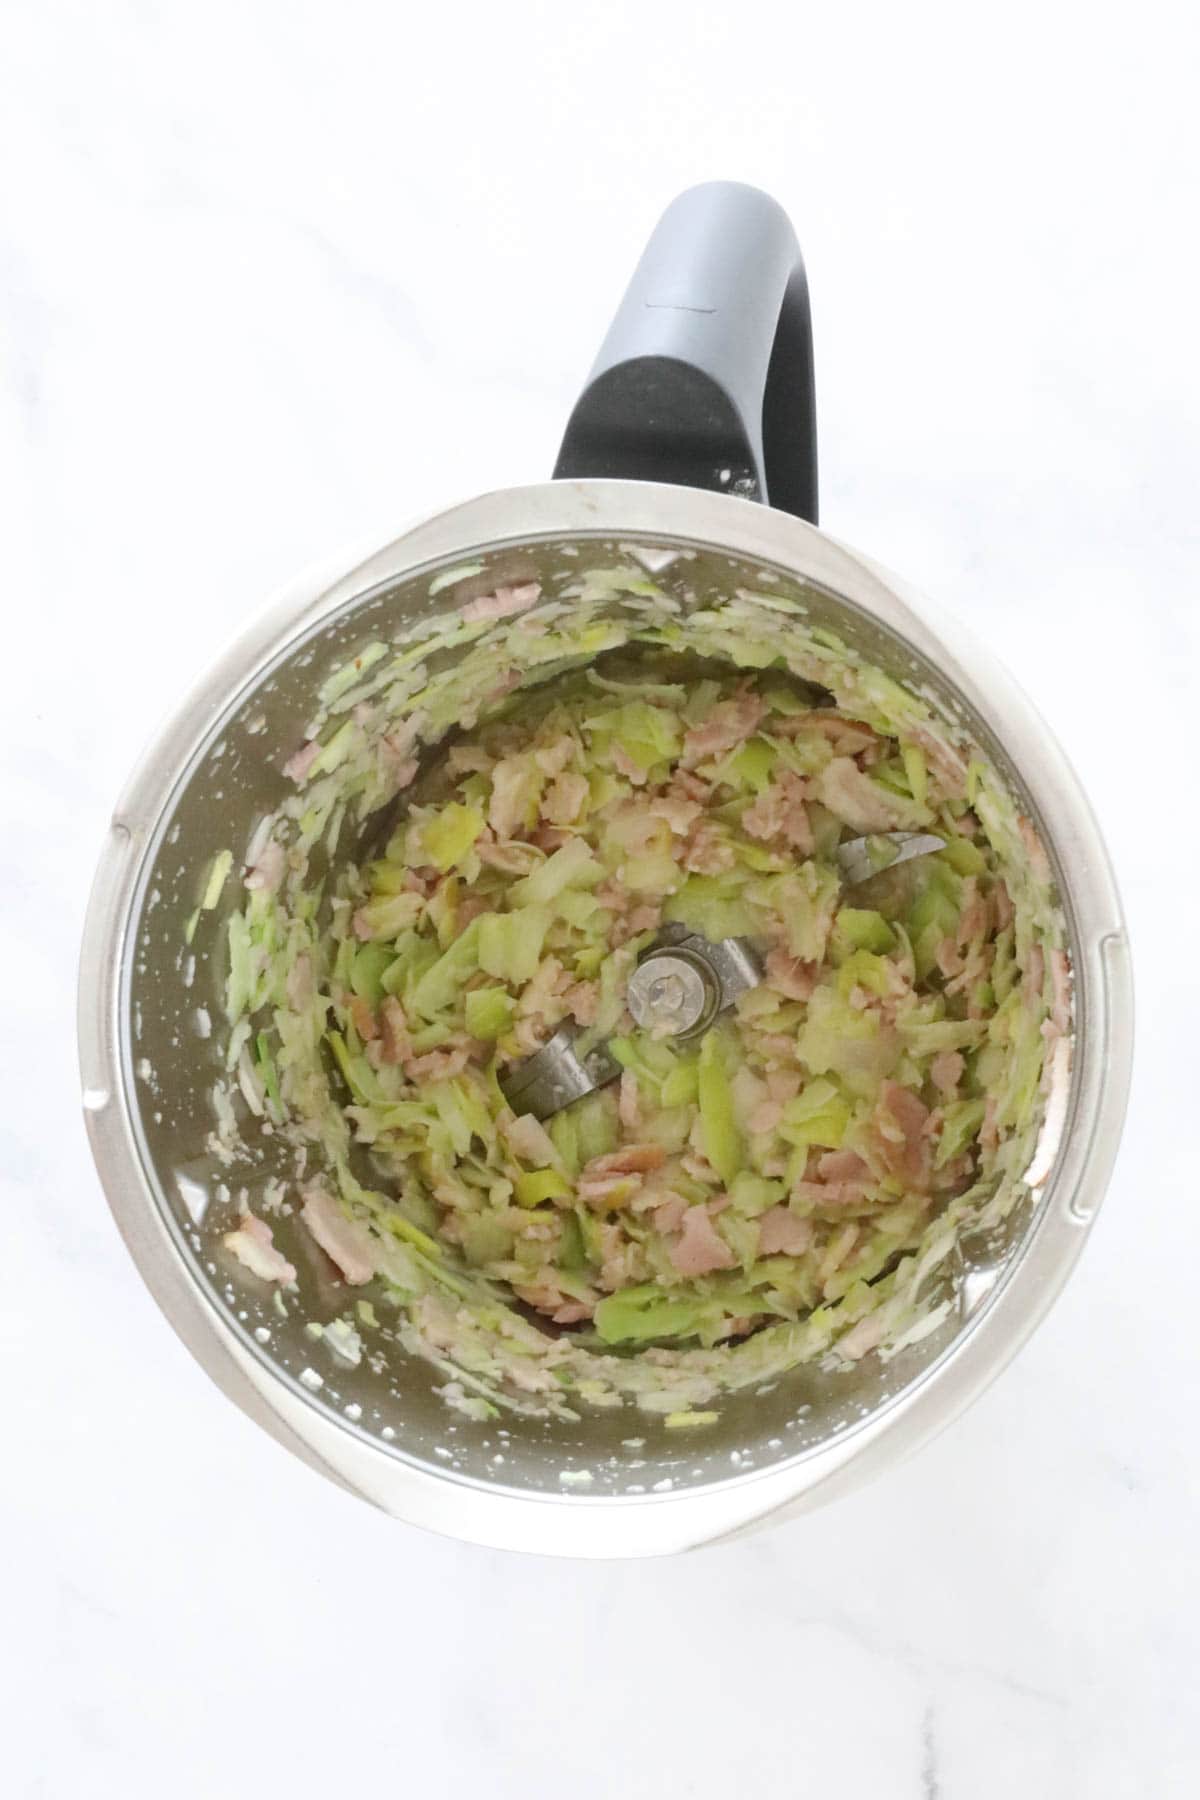 Sauteed leek and bacon in a Thermomix.